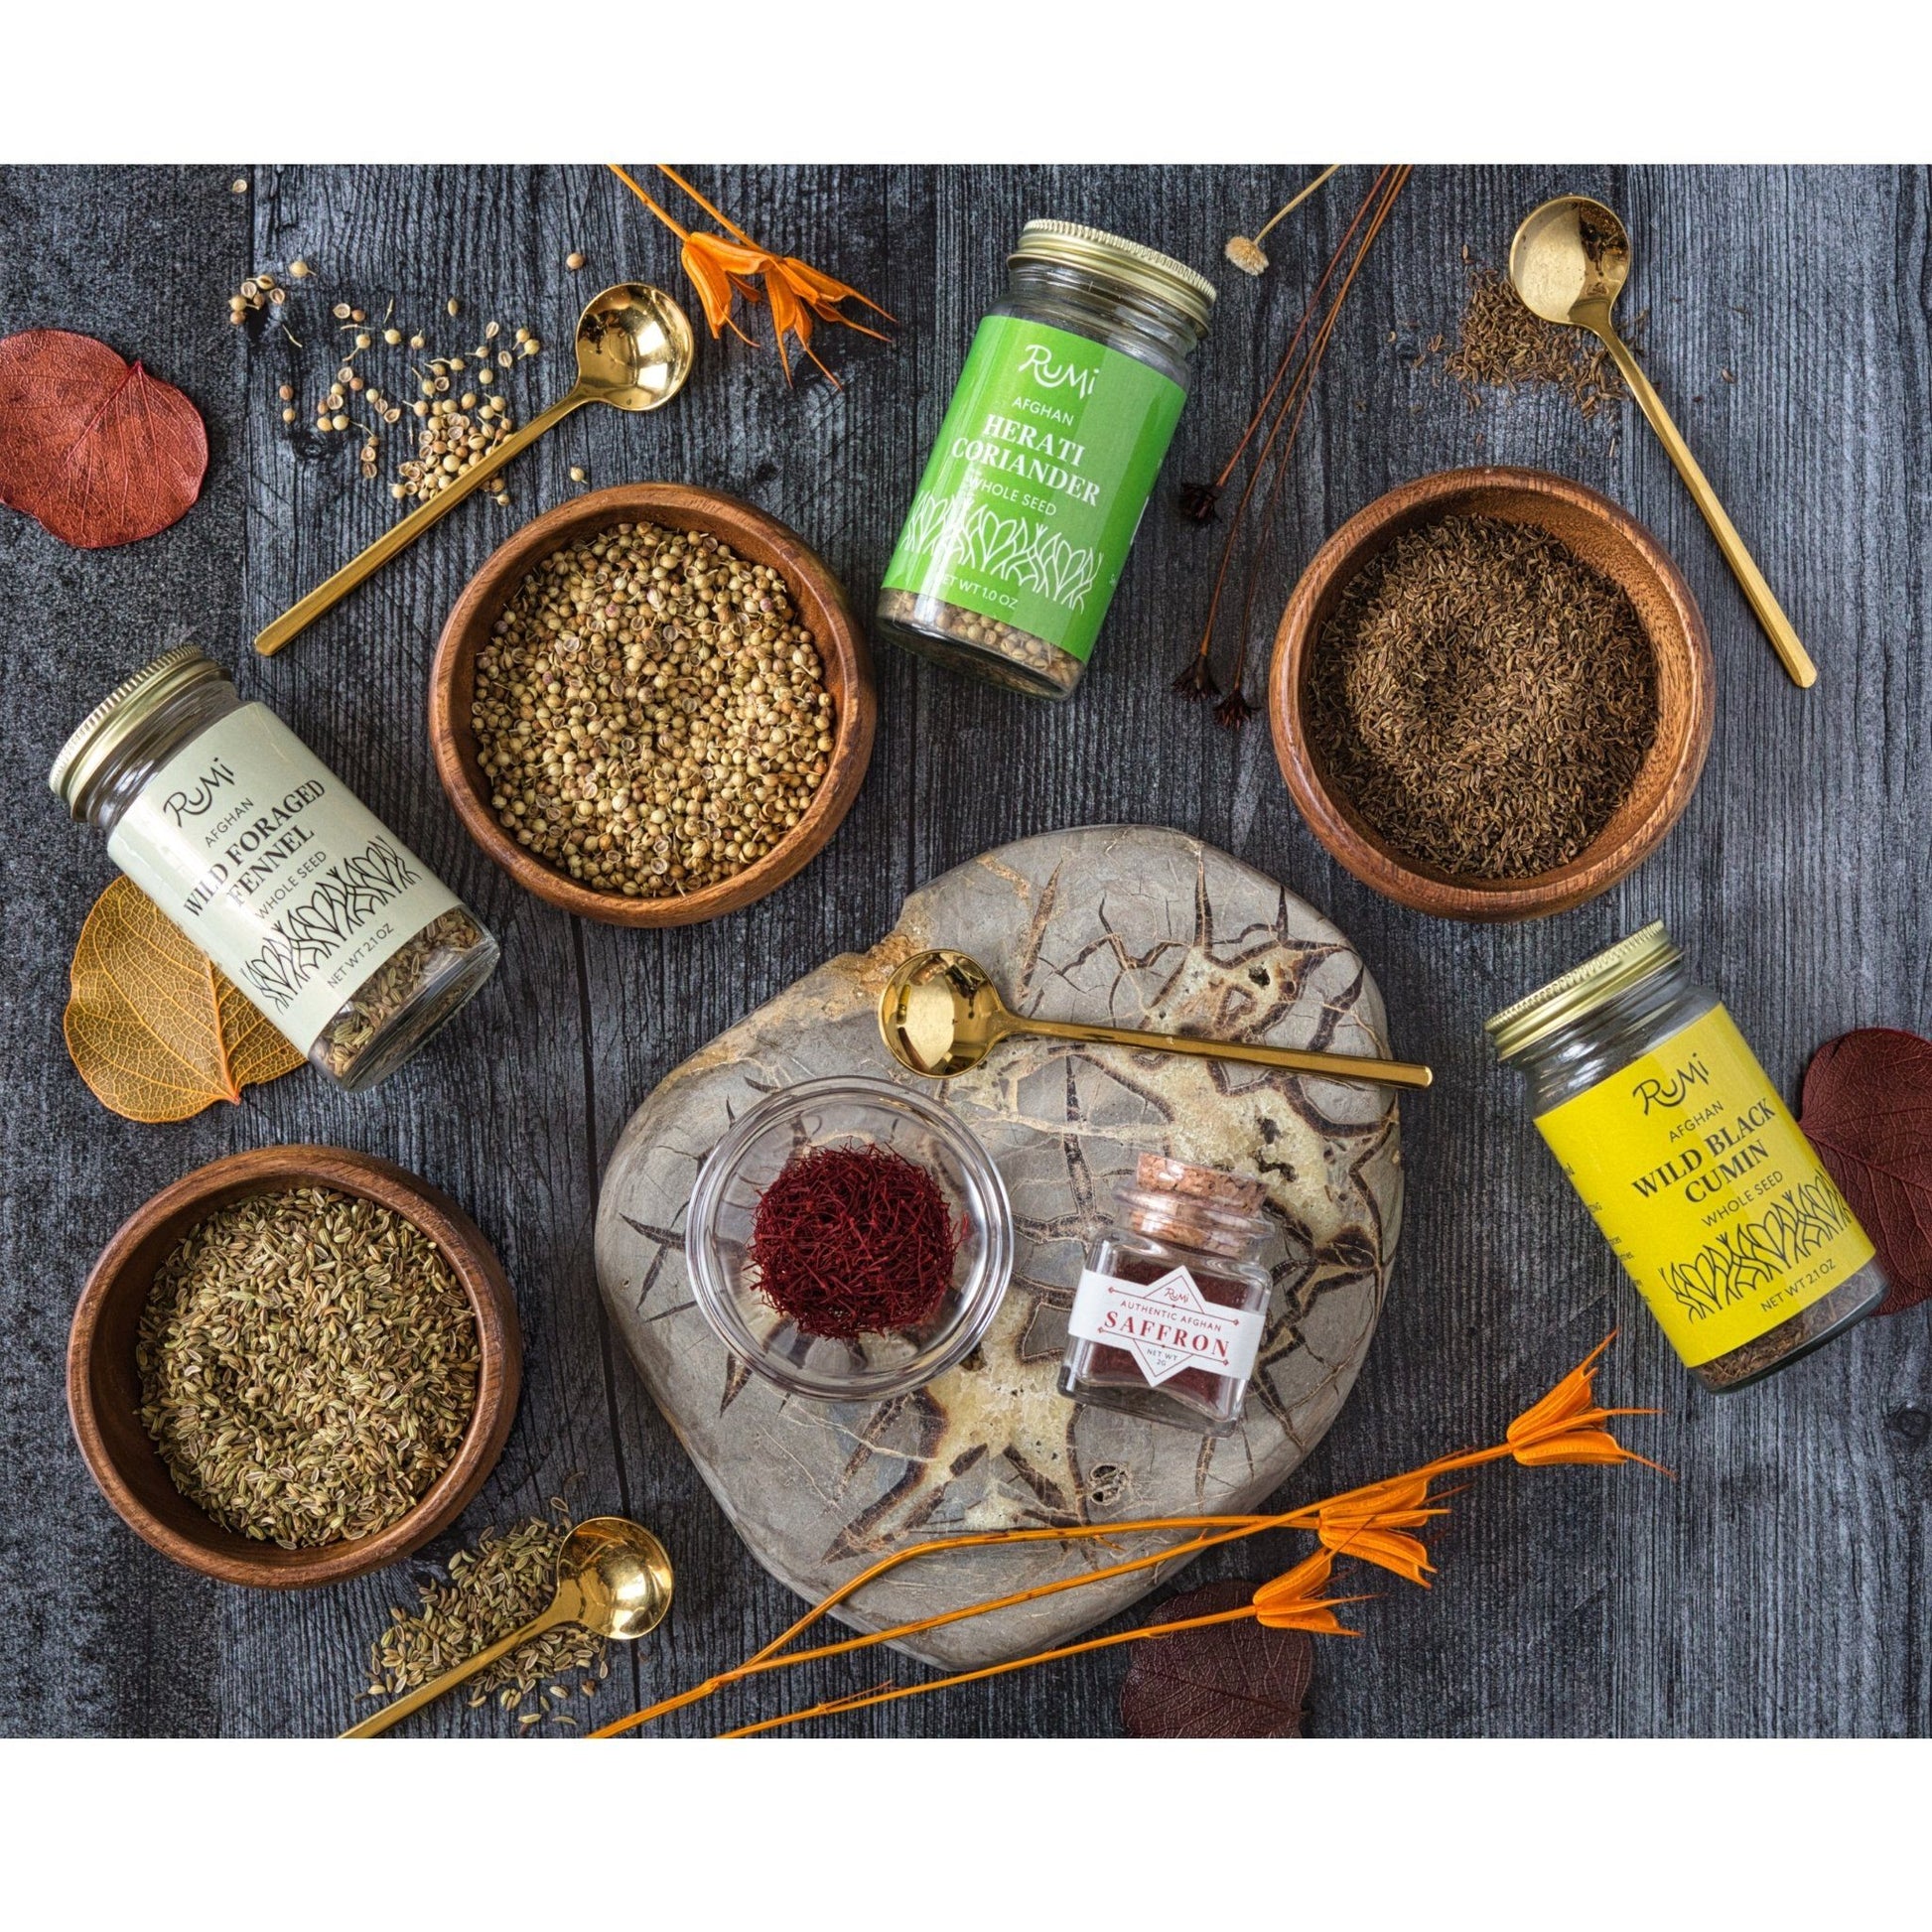 Rumi Spice: Directly sourced spices from Afghanistan